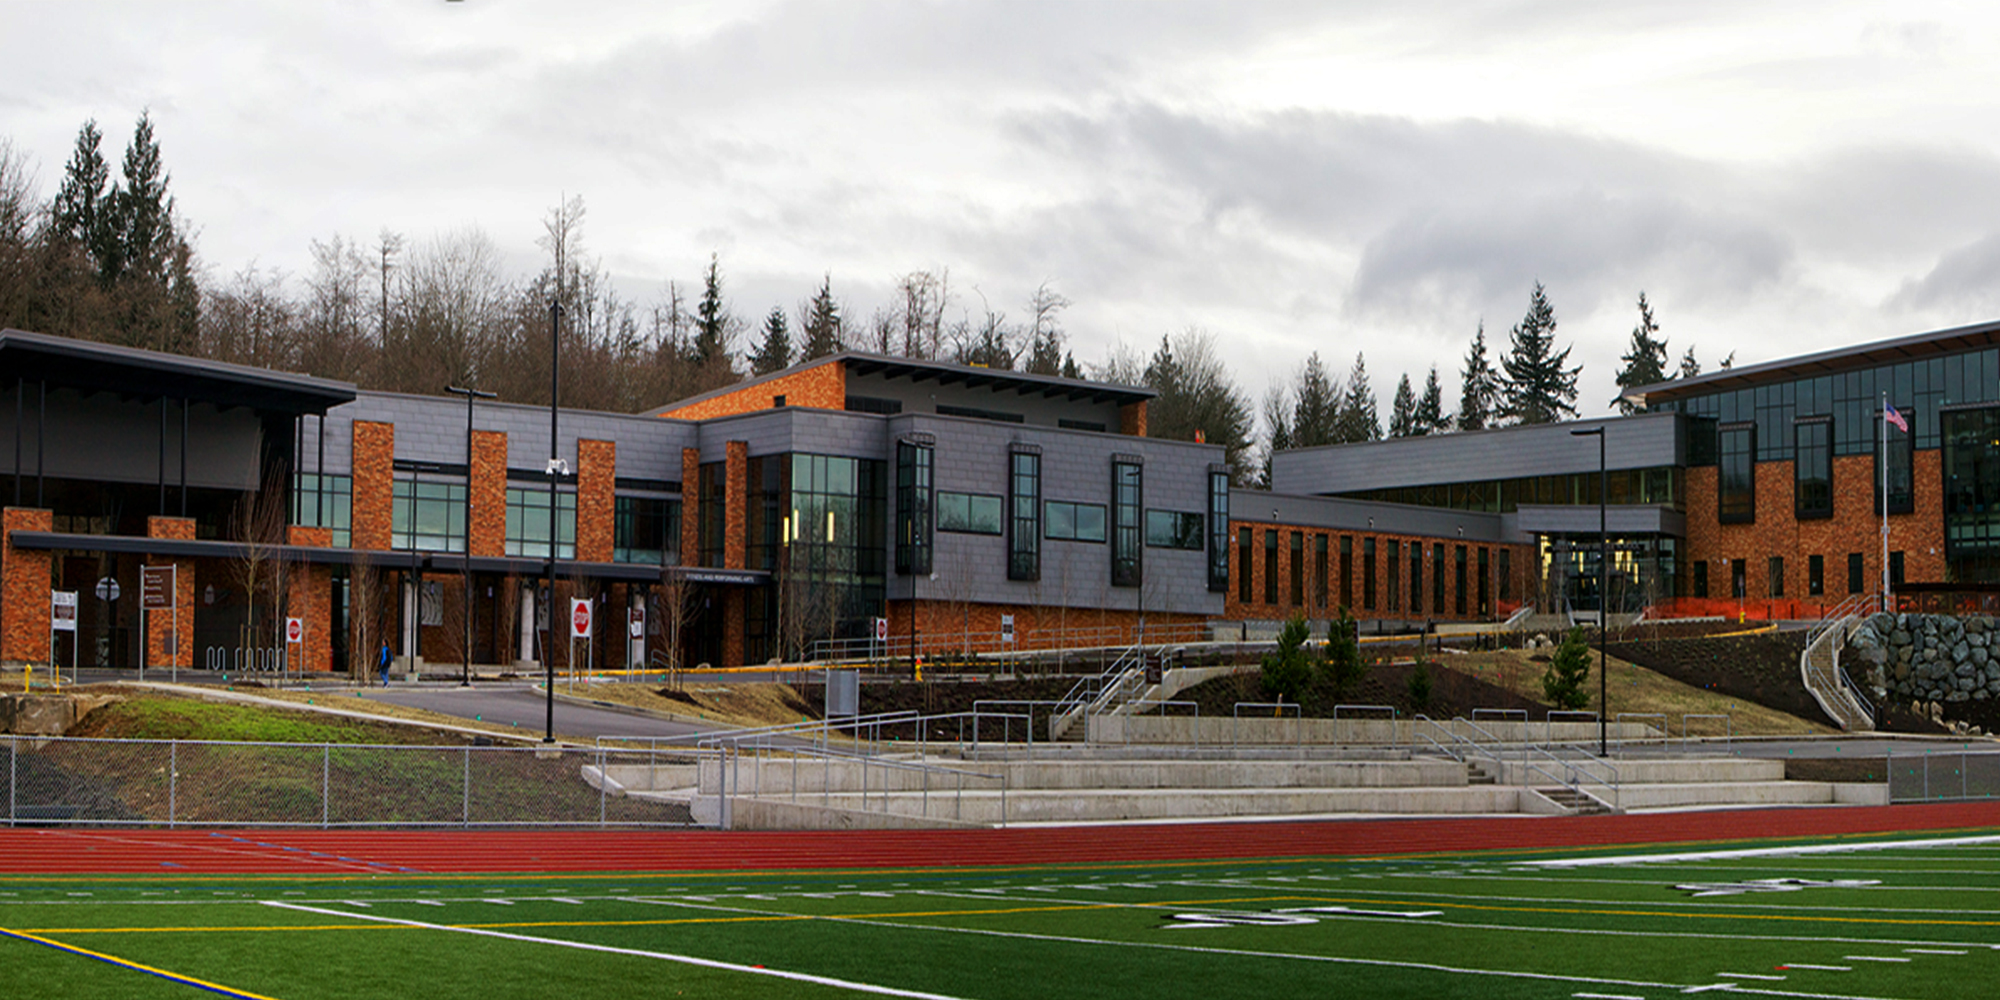 Exterior view of Valley View Middle School with football field in the foreground